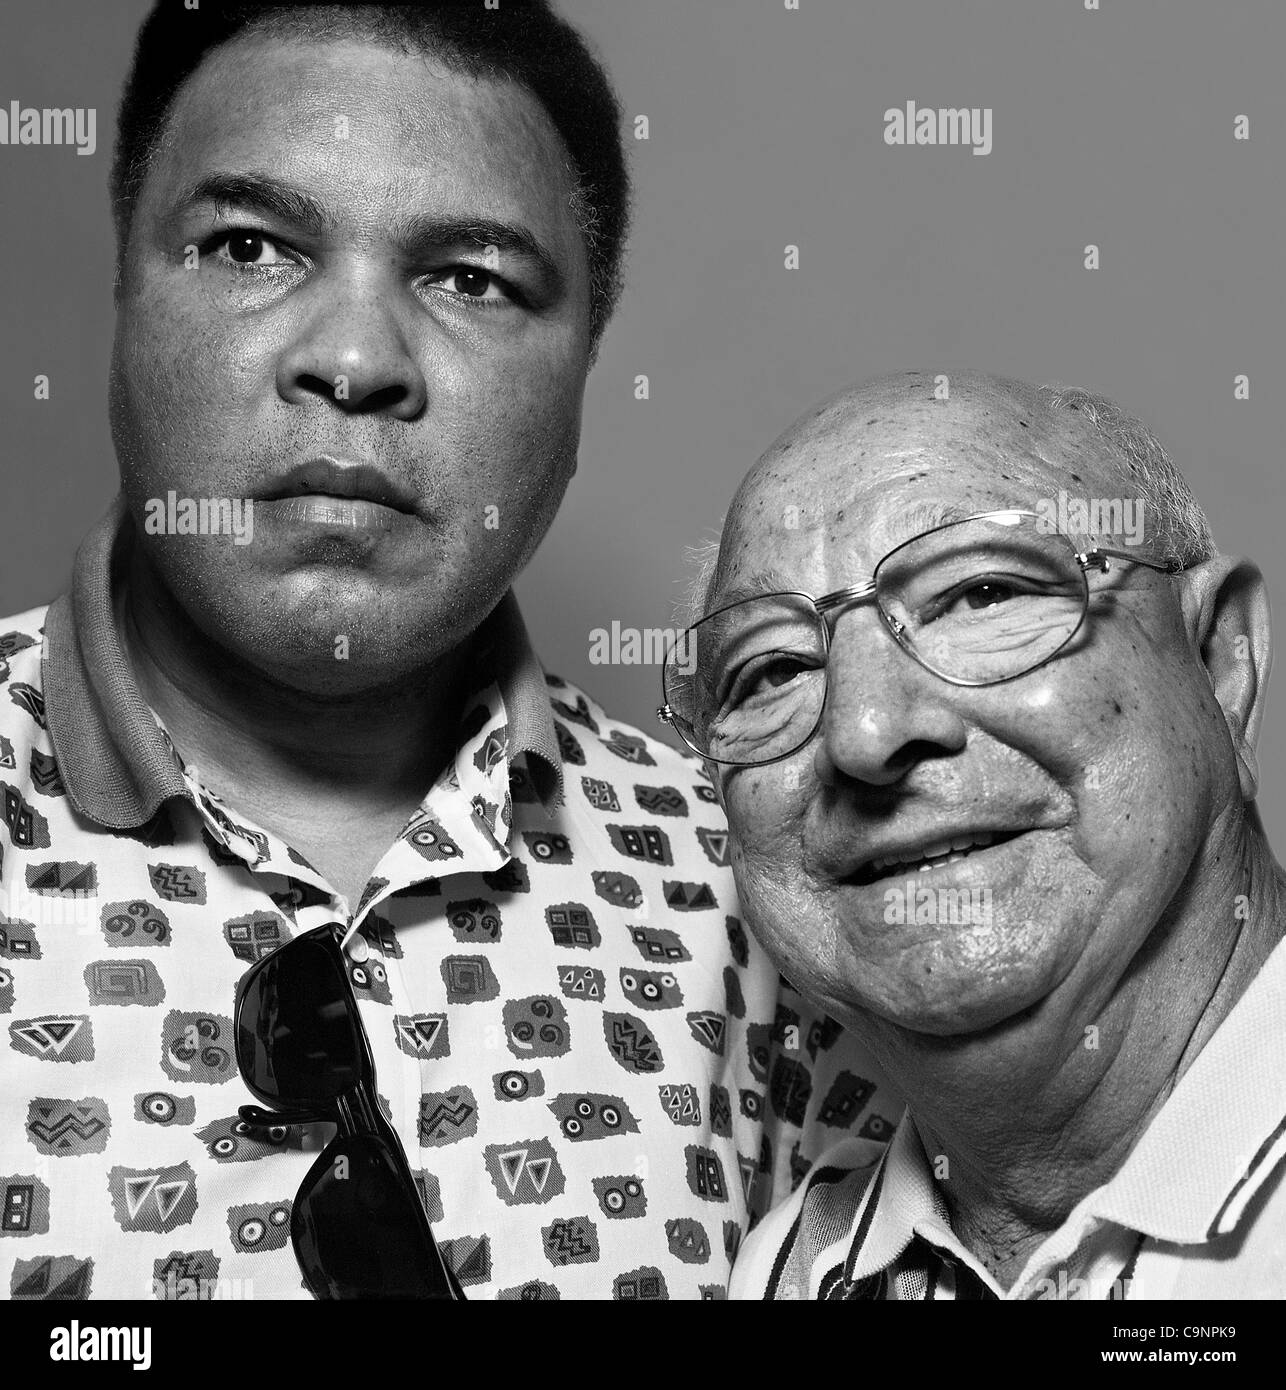 Feb 1, 2012 - Tampa, Florida, U.S. - Renowned boxing trainer ANGLEO DUNDEE has died at the age of 90. Dundee, who helped train Muhammad Ali and Sugar Ray Leonard, passed away in Tampa. Pictured with MUHAMMAD ALI in March 1998 in South Florida. (Credit Image: © David Jacobs/ZUMA Press) Stock Photo